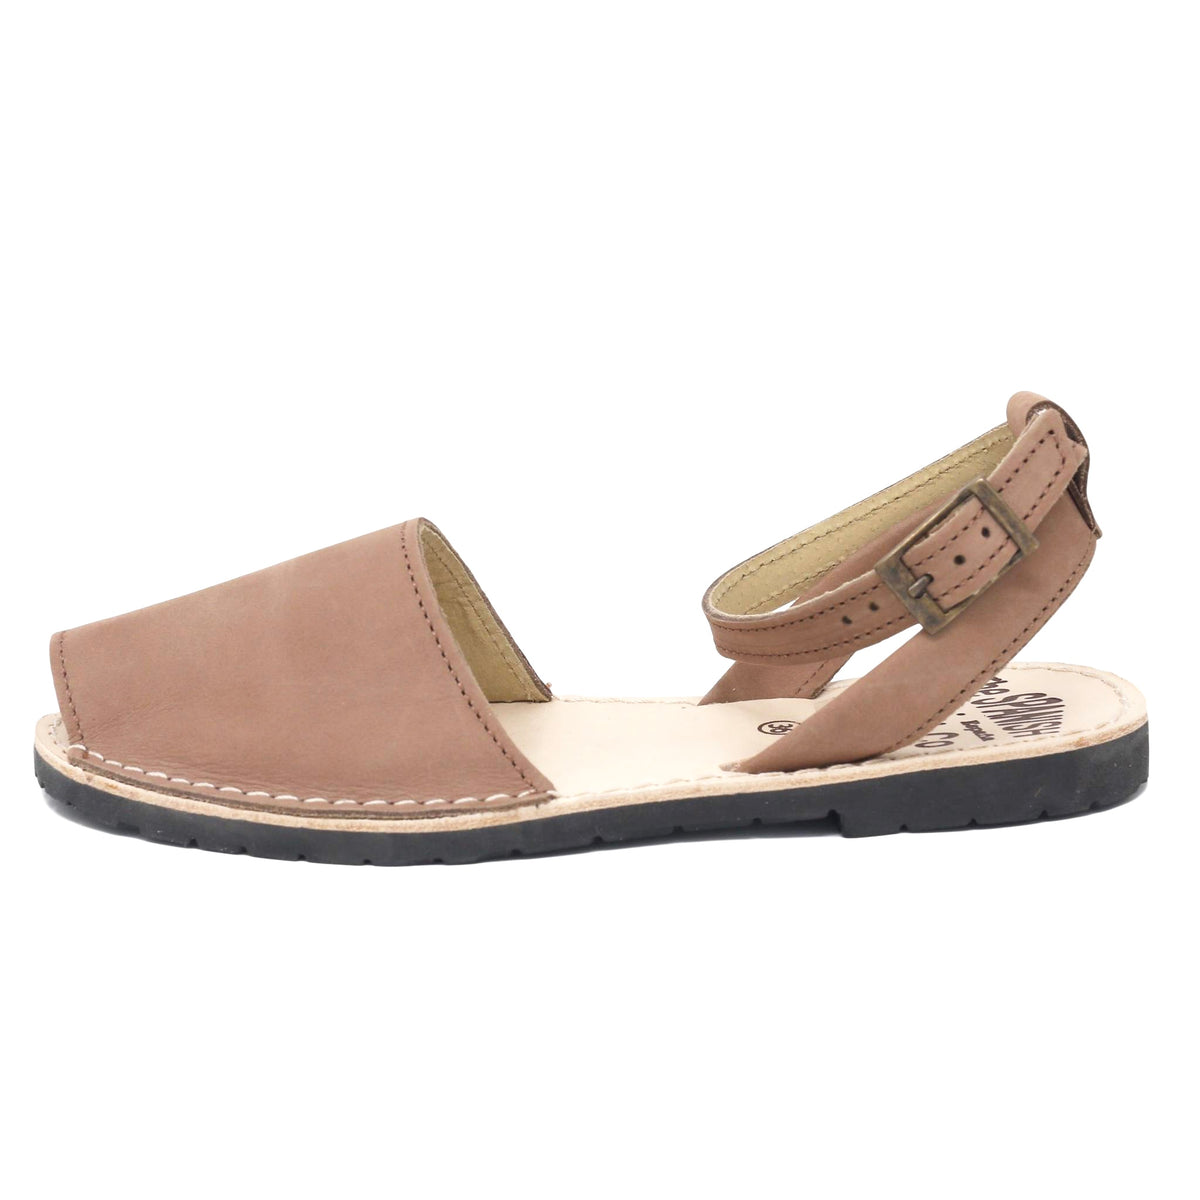 Tan nubuck sandals with strap - The Spanish Sandal Company